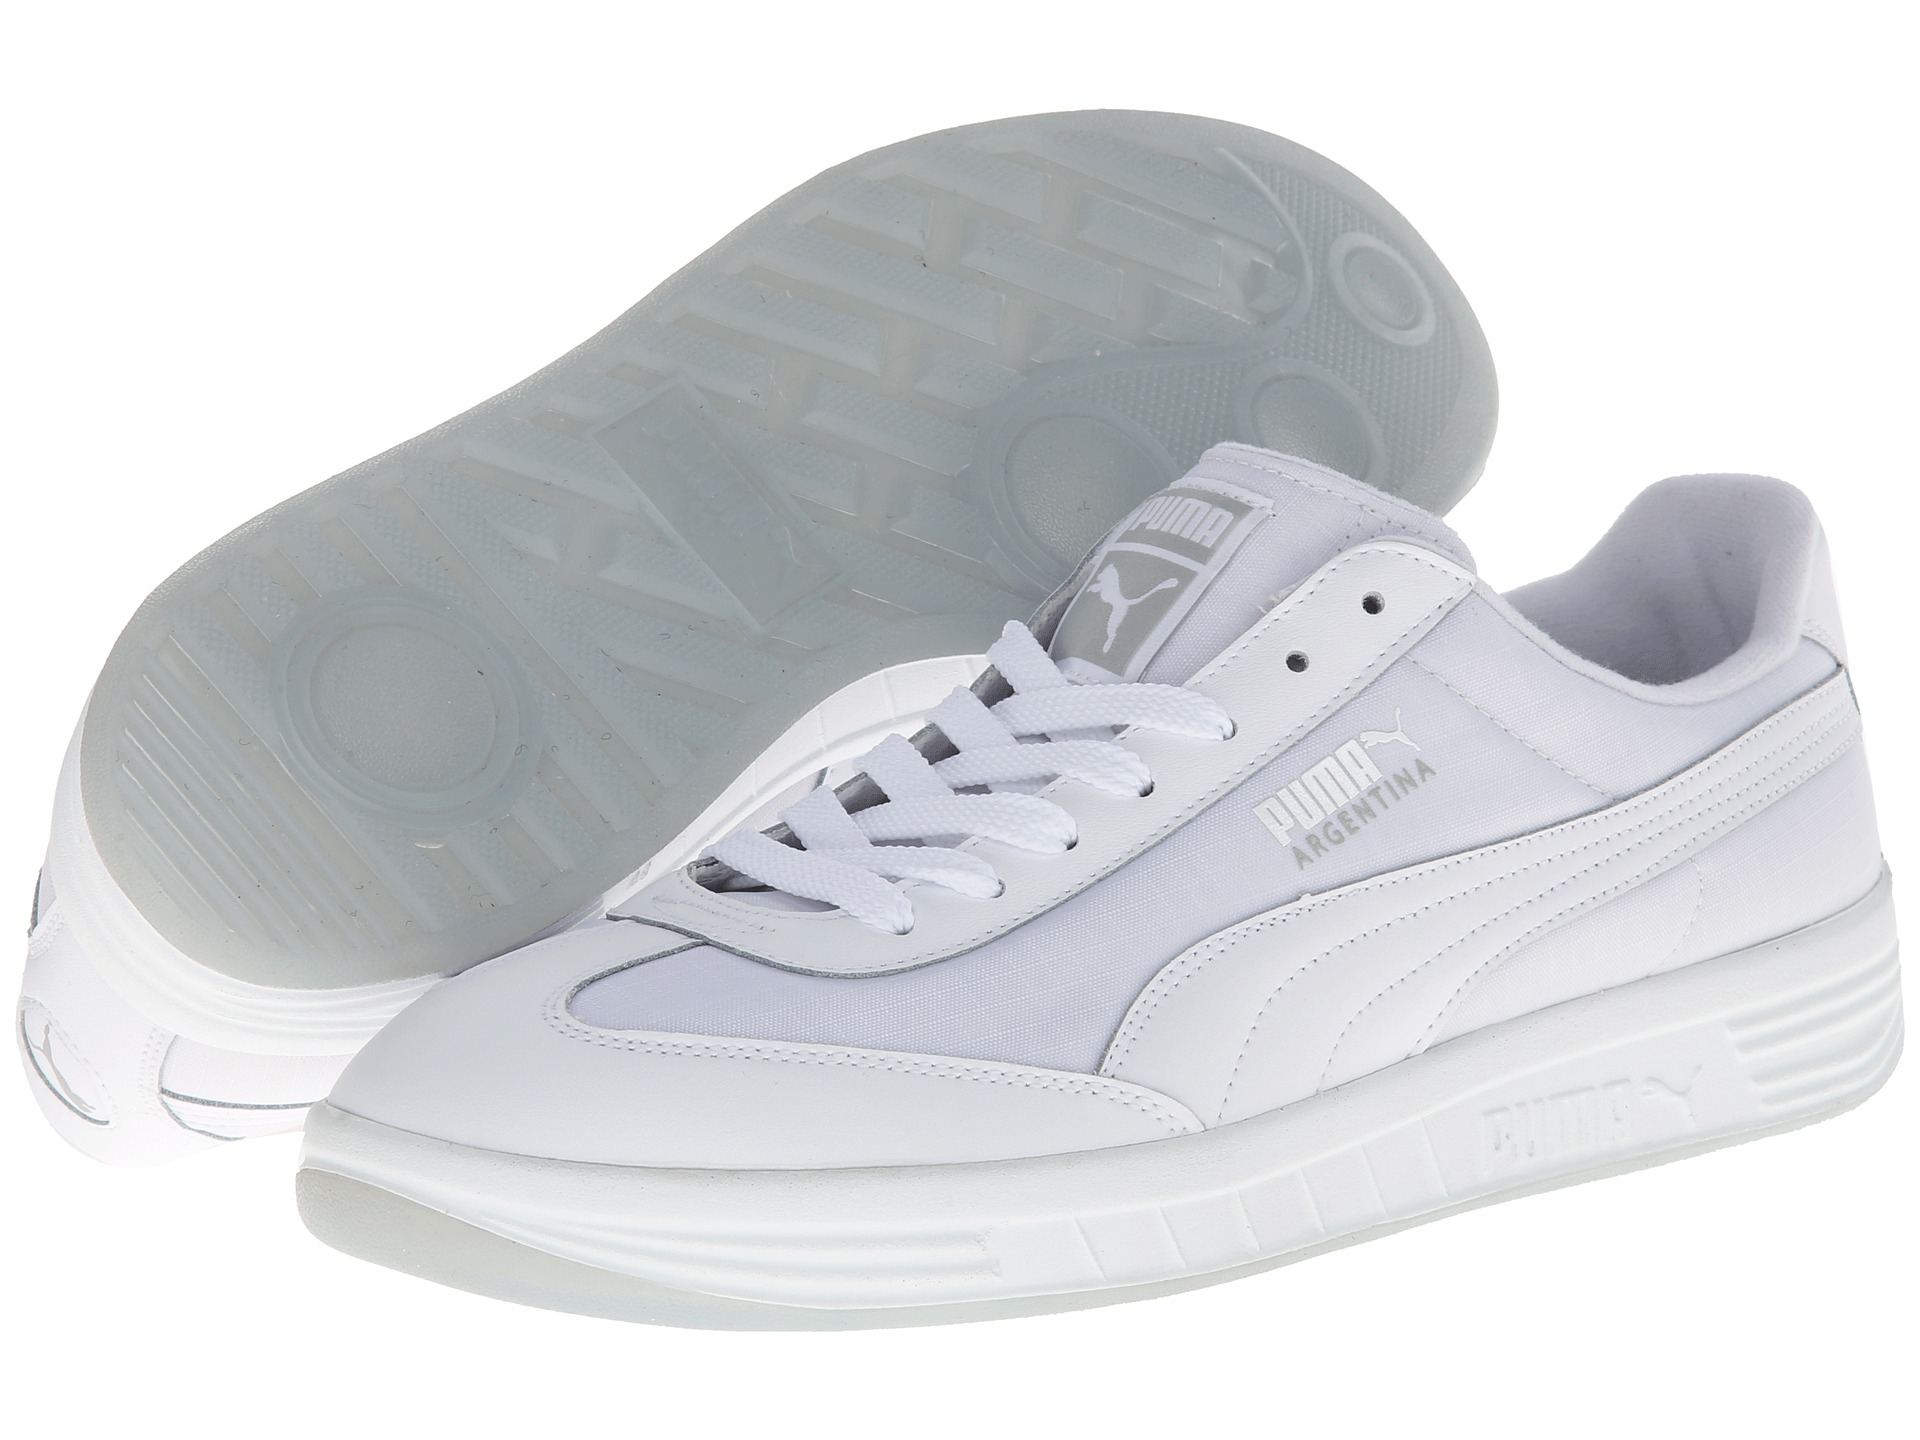 PUMA Argentina Iced in White/Gray 